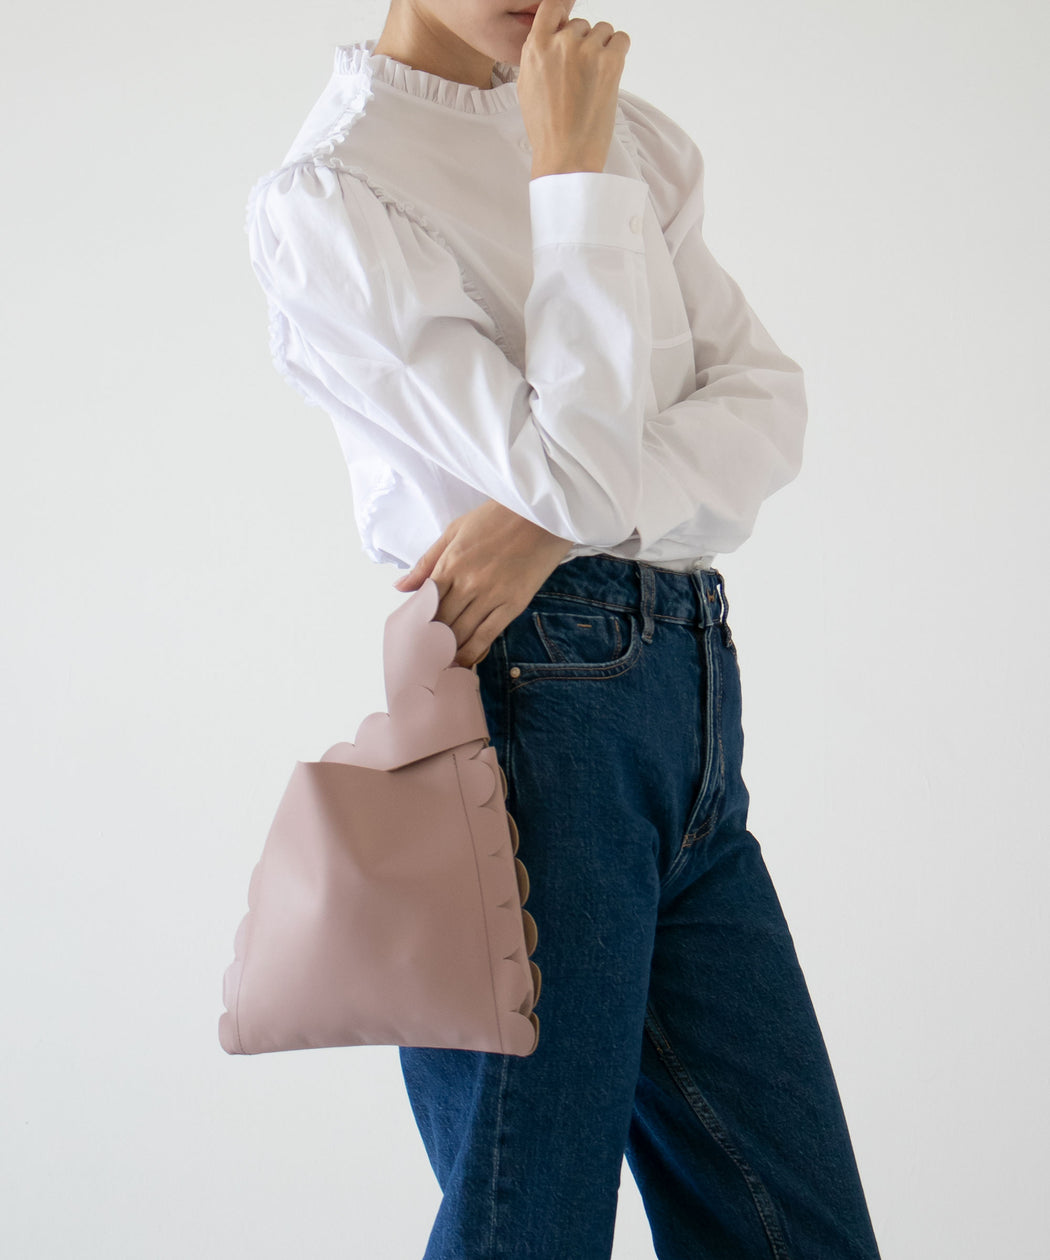 Scalloped leather shopping bag